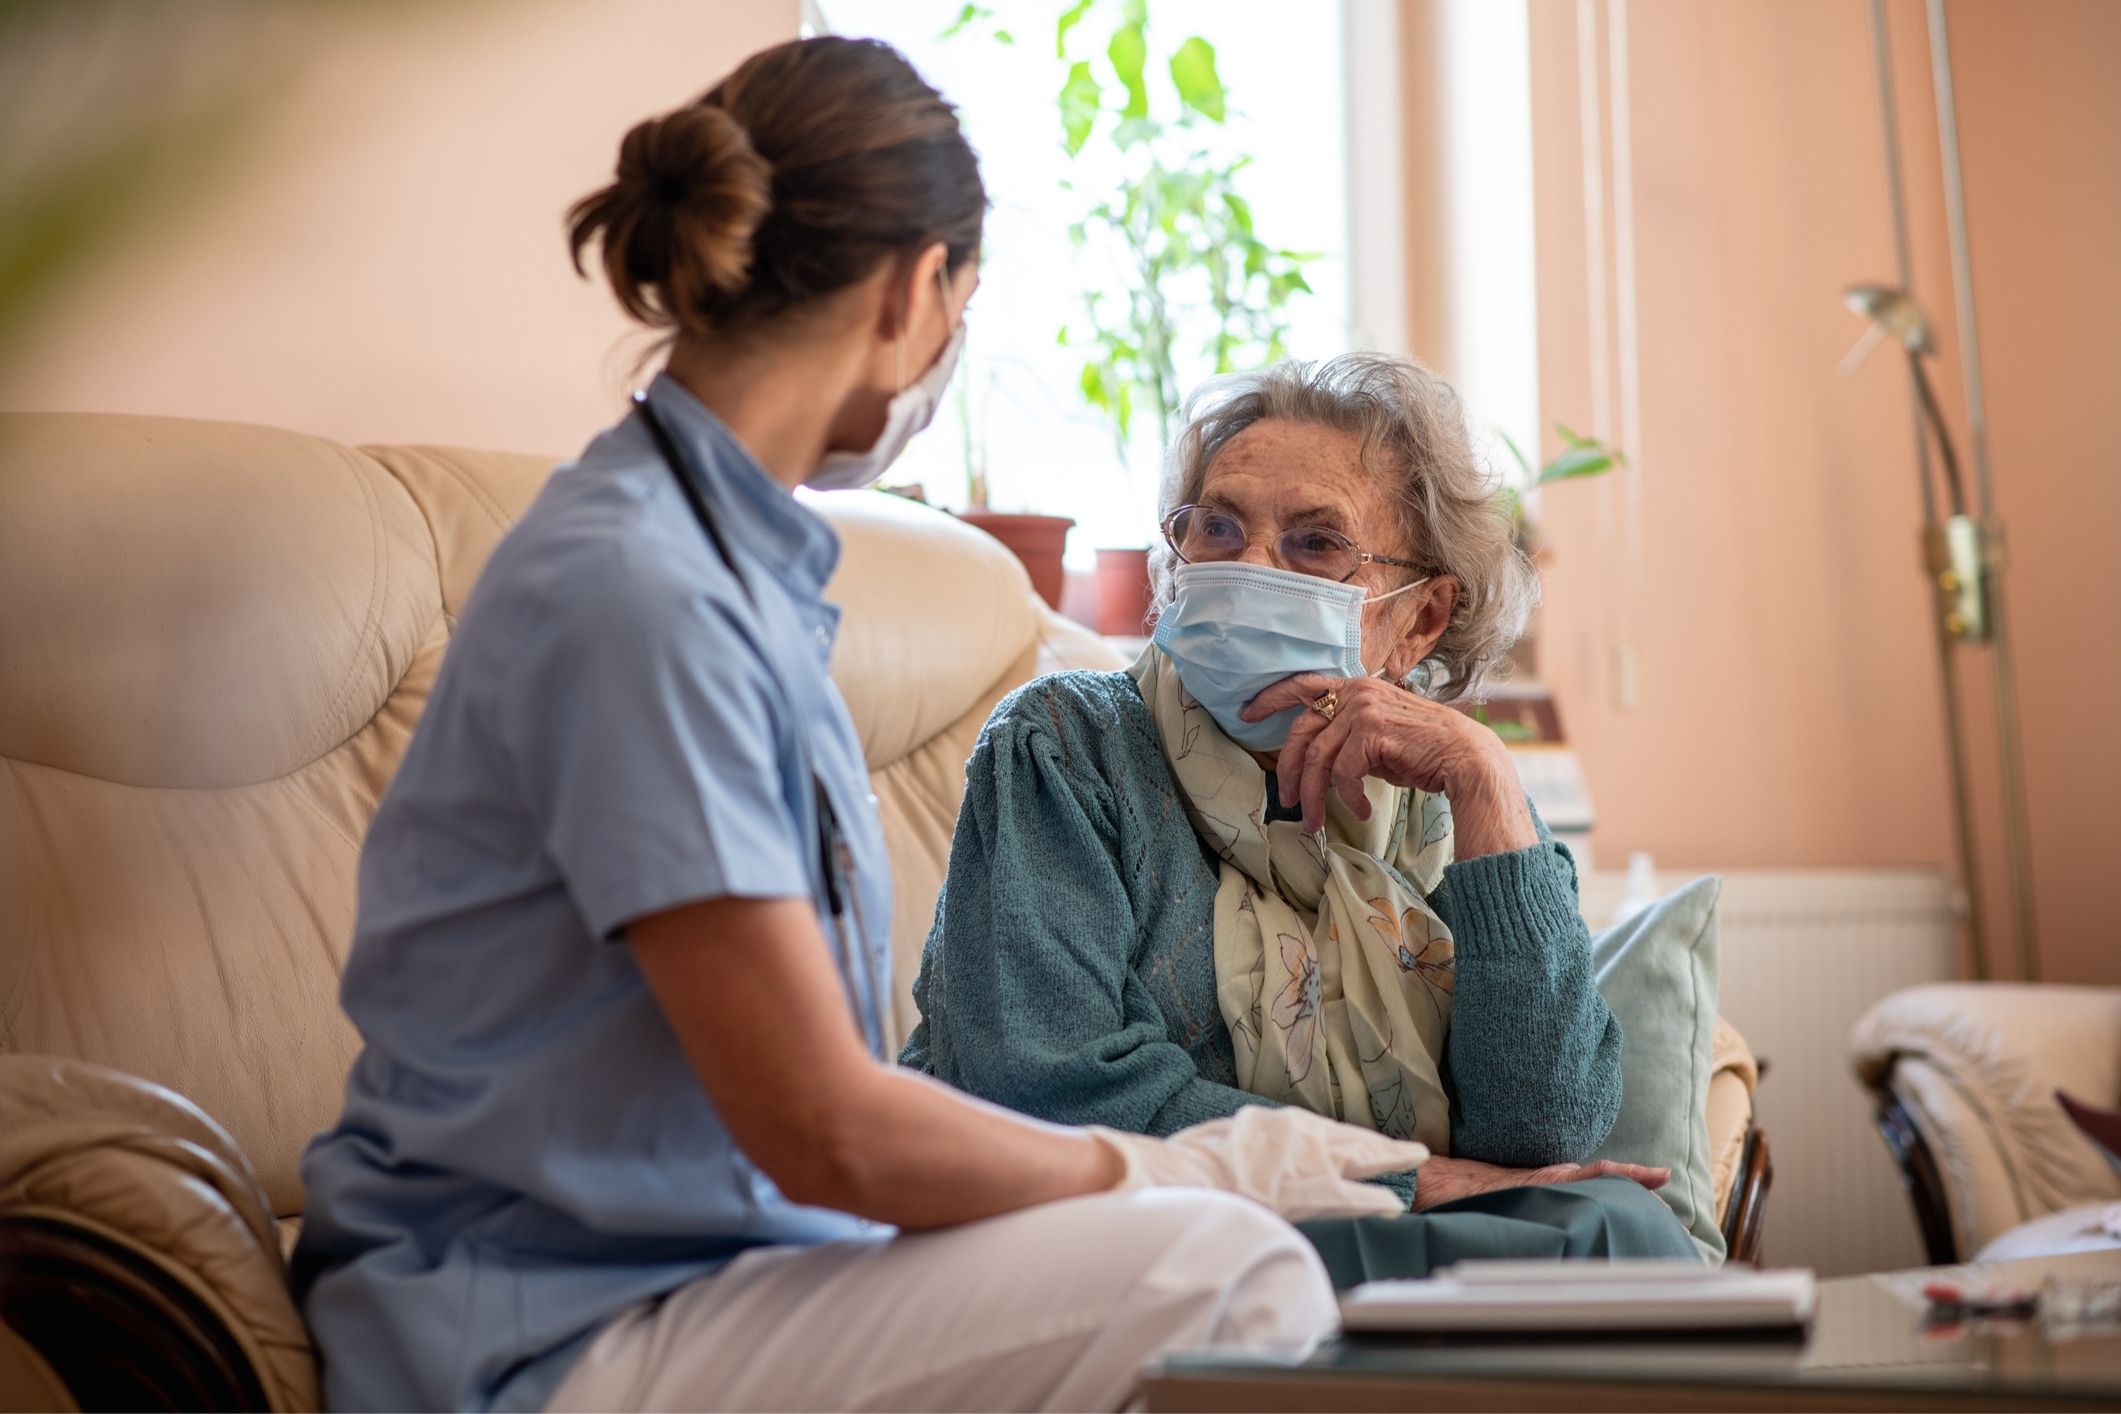 Should home care workers have to reveal their vaccine status to clients?